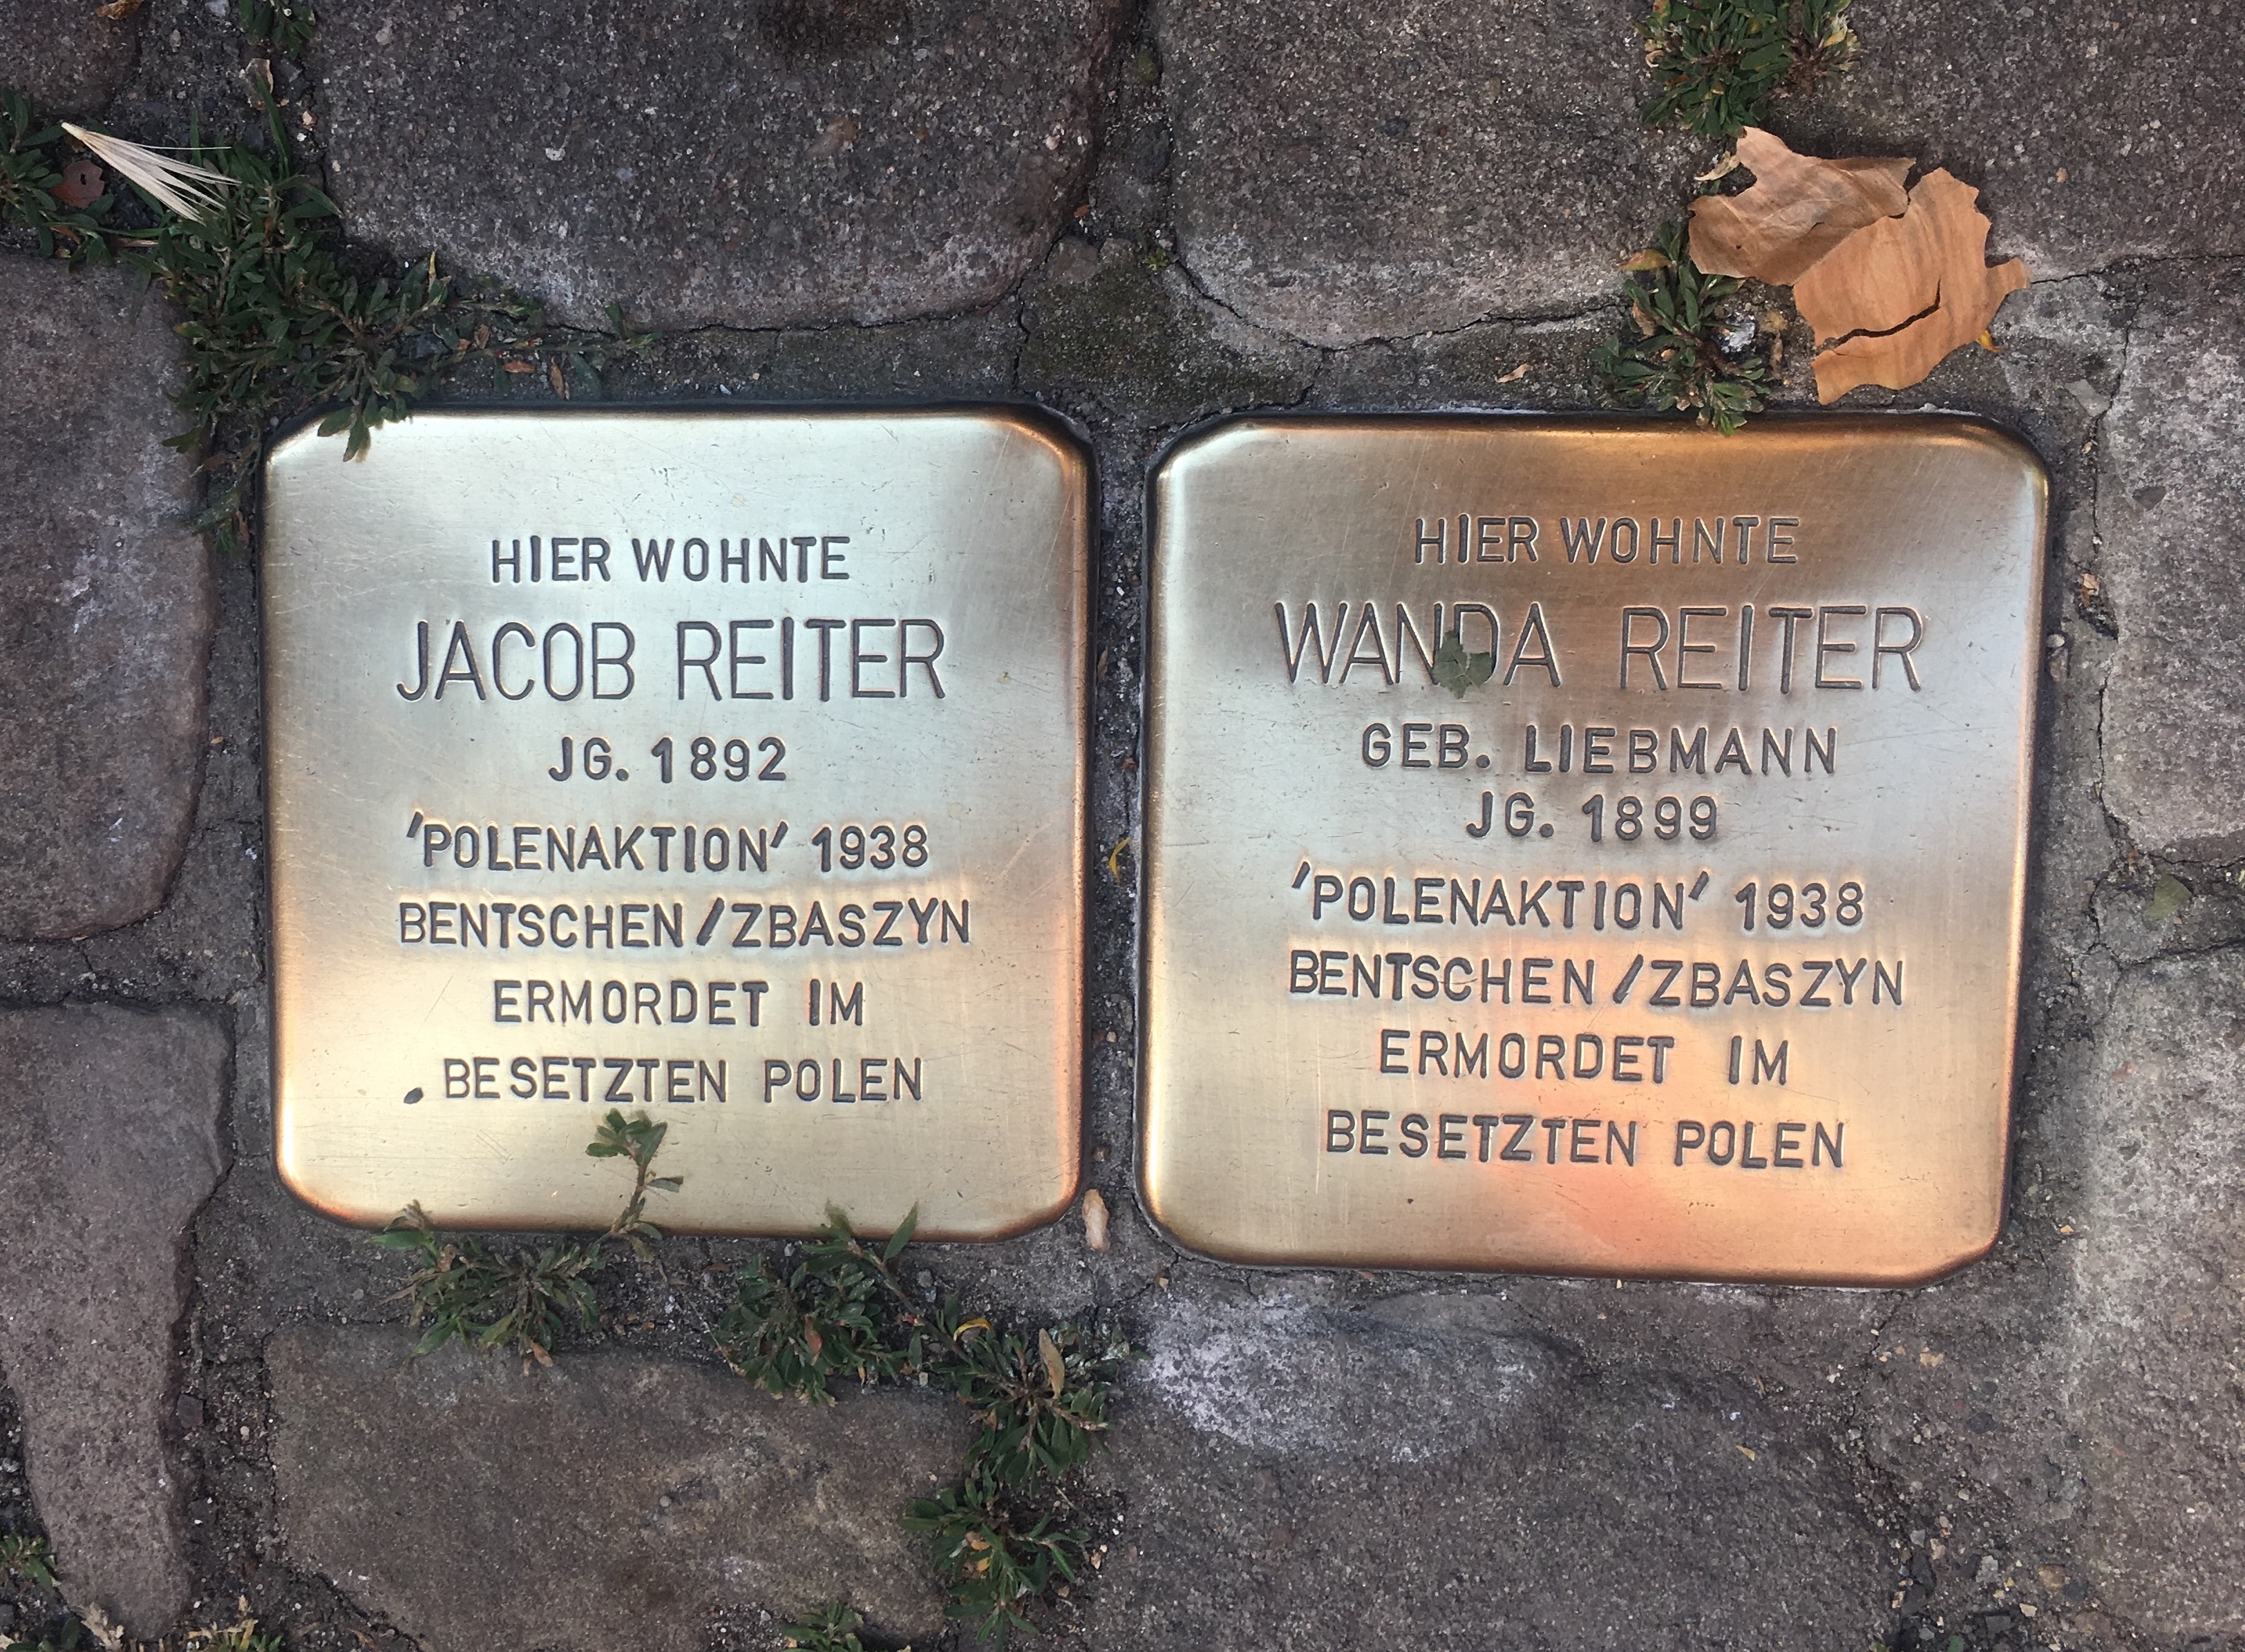 ID: Two gold plaques placed in a cobblestone sidewalk.